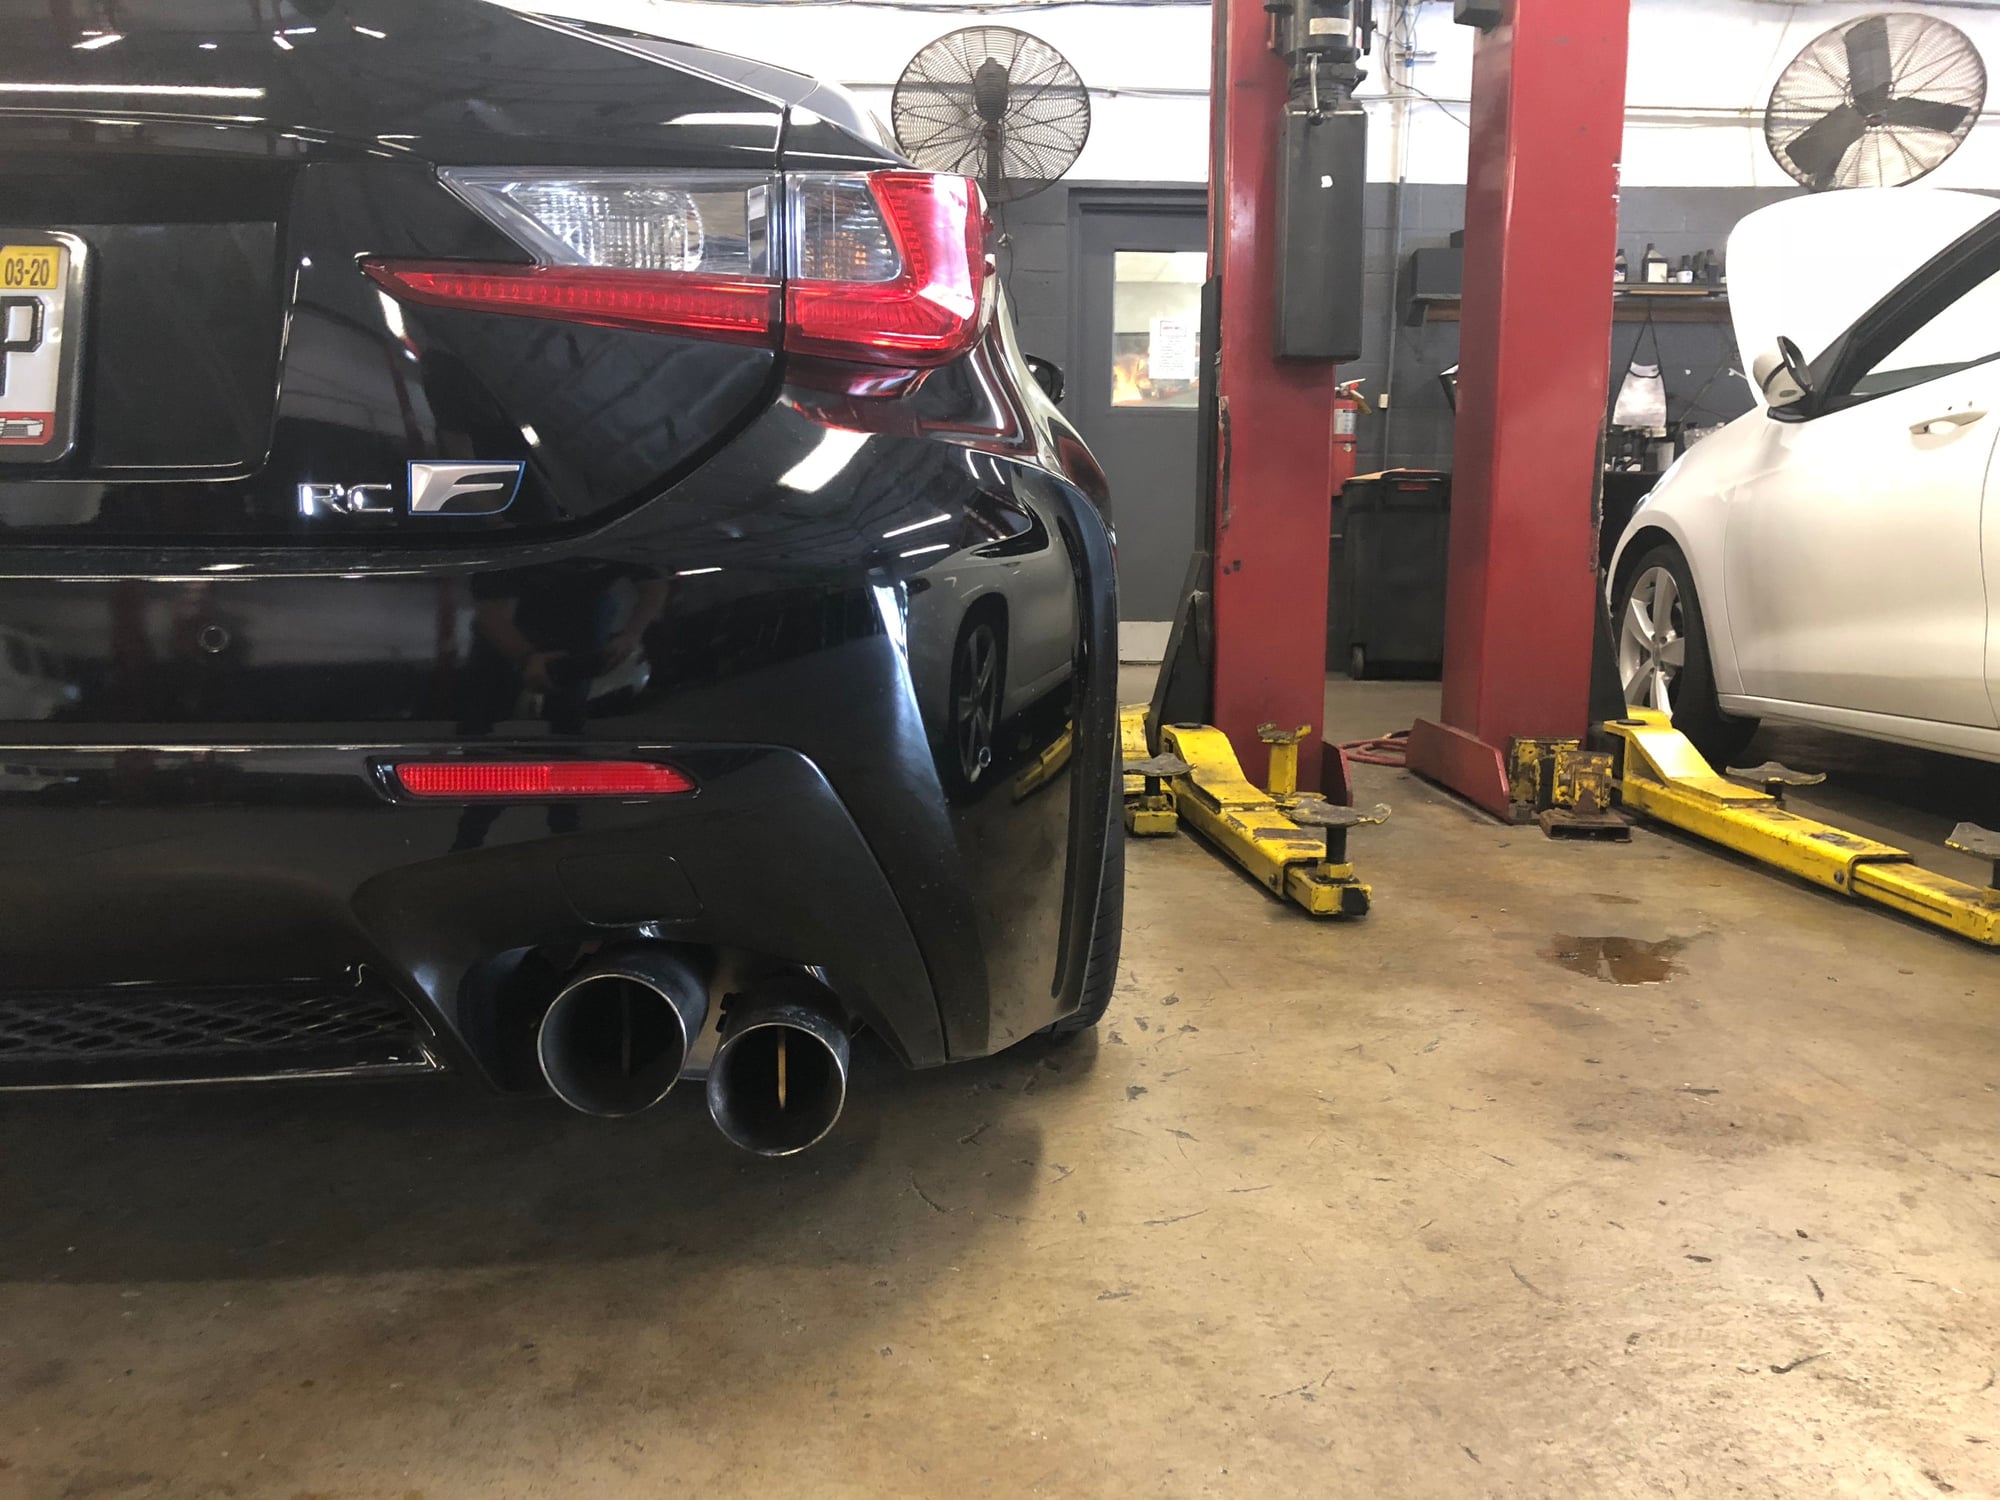 Miscellaneous - Spacers - 20mm Front & 15mm Rear - Used - 2015 to 2019 Lexus RC F - Homestead, FL 33033, United States